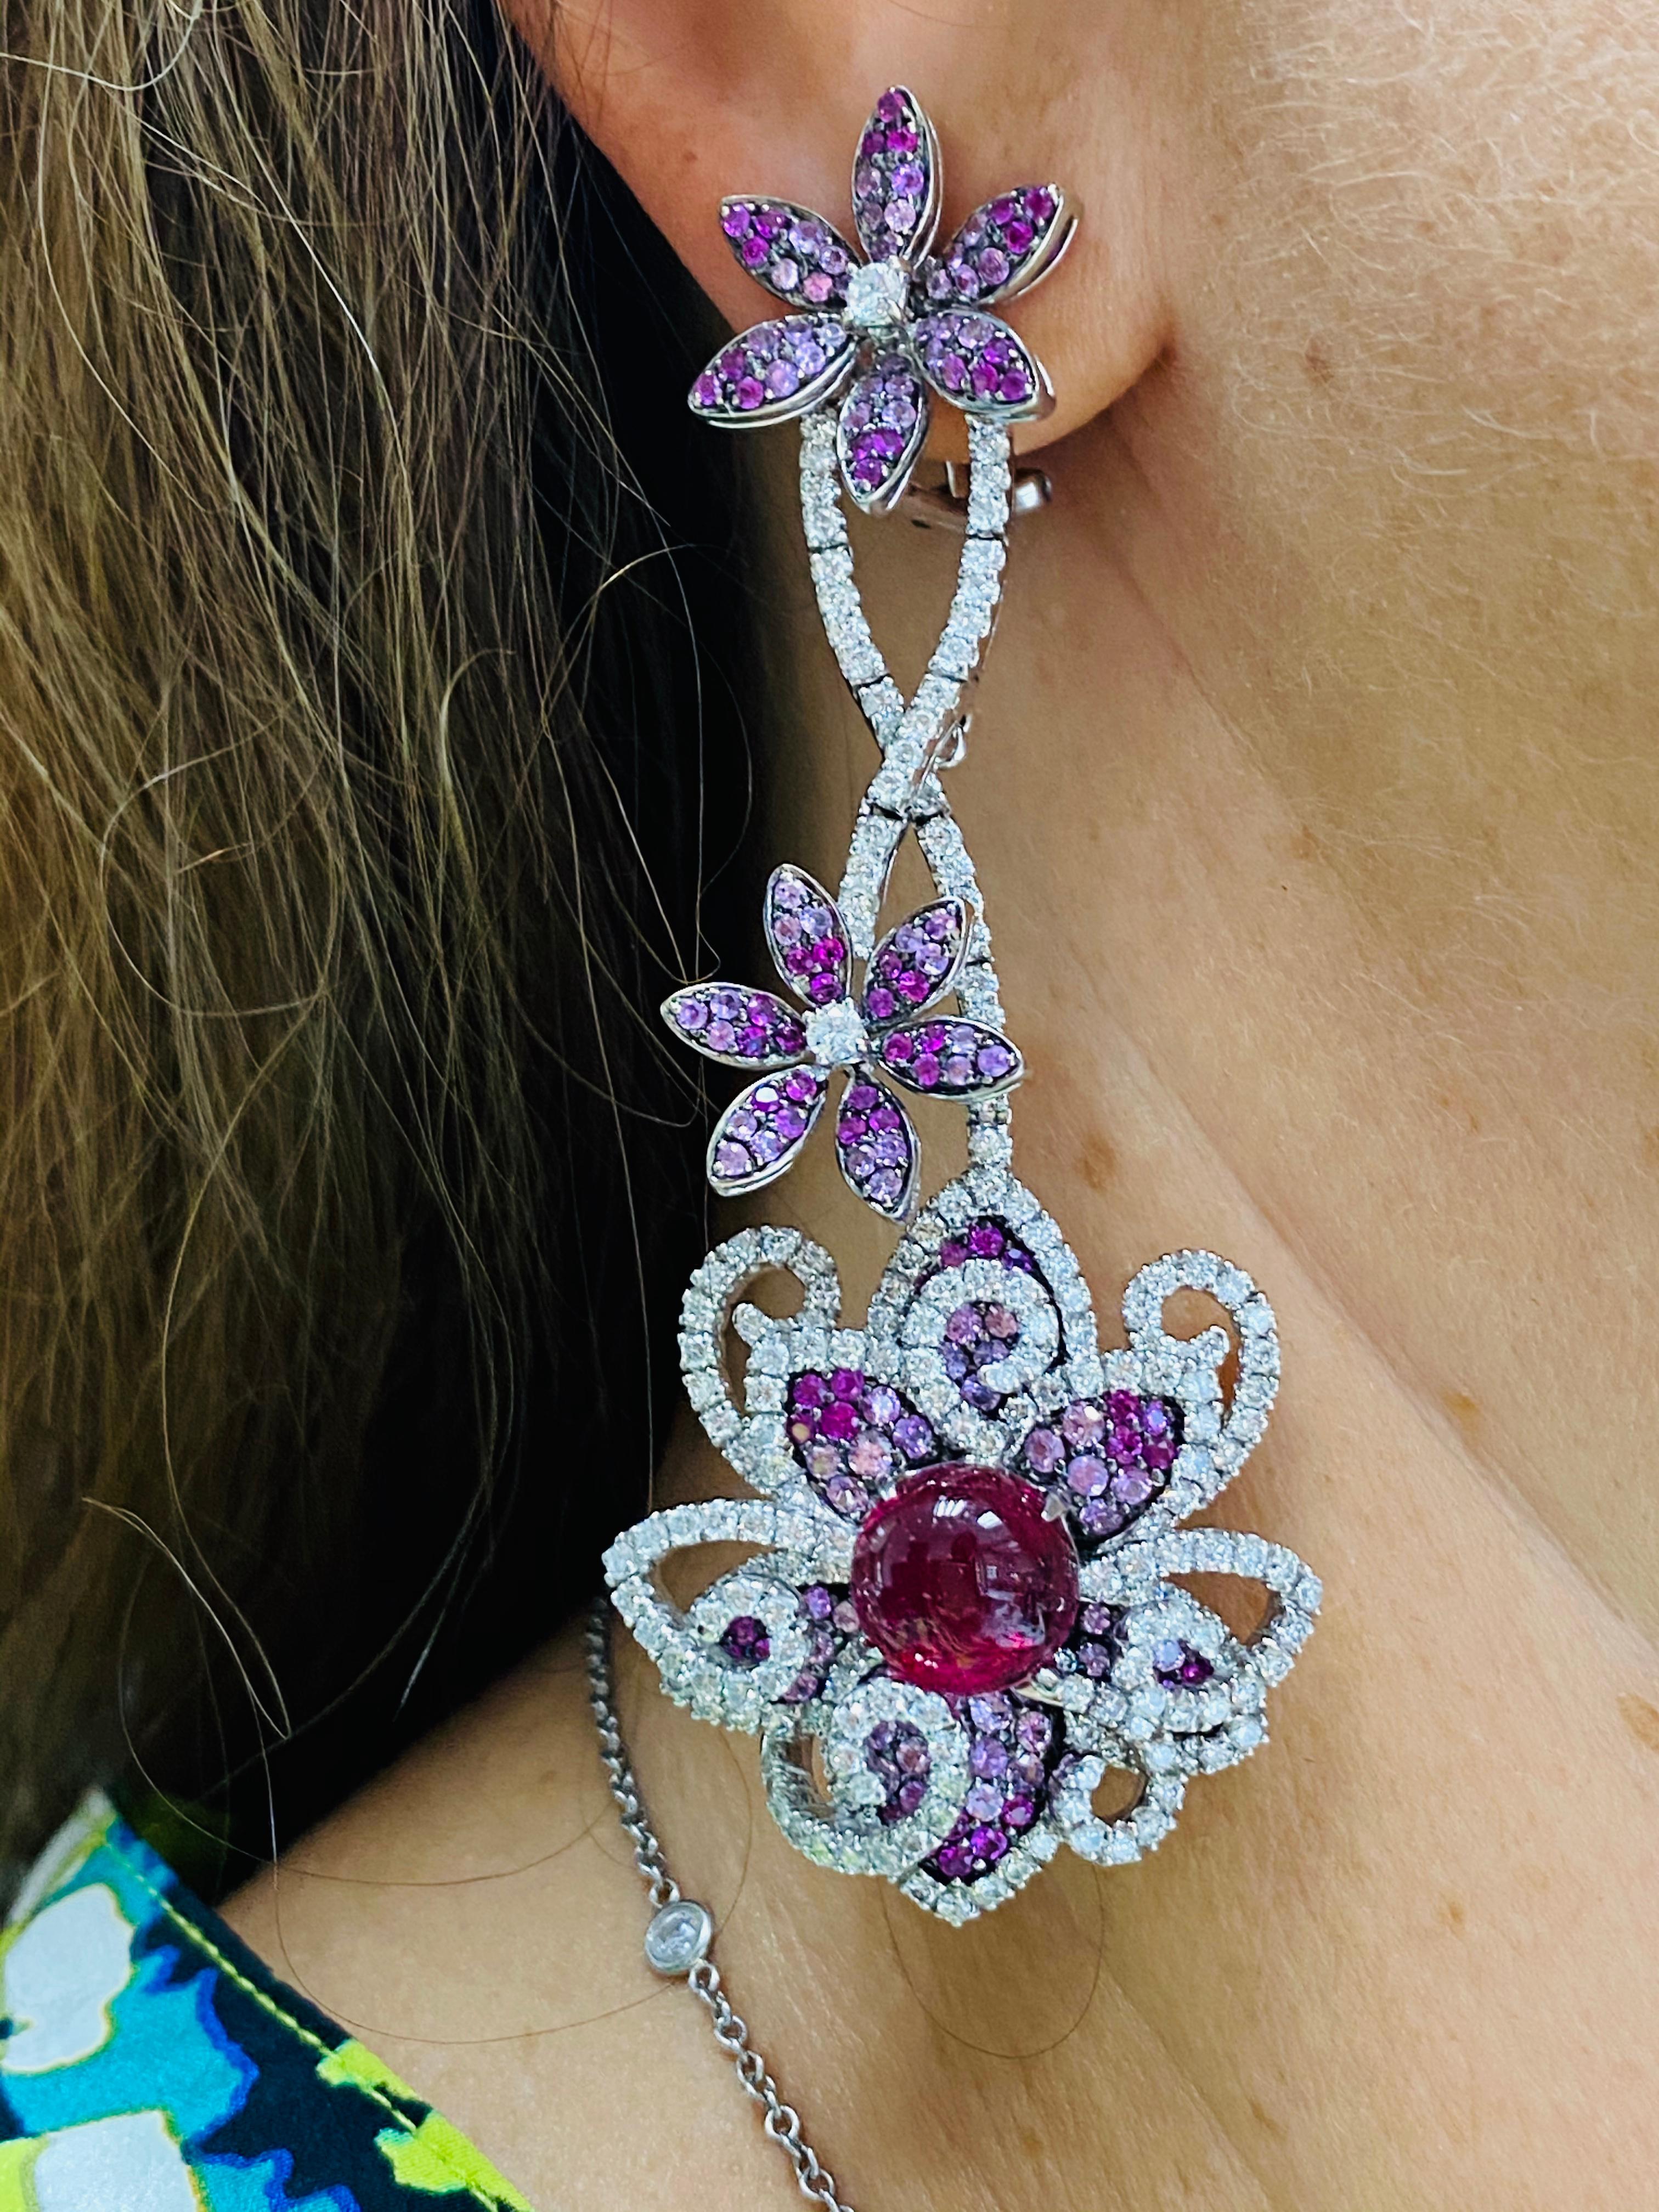 Magnificent Ruby and Diamond Earrings, designed by Diana M. Jewels. 
Features 12.76 Carats of rubies and pink sapphires, surrounded by 5.57 carats of diamonds. 
